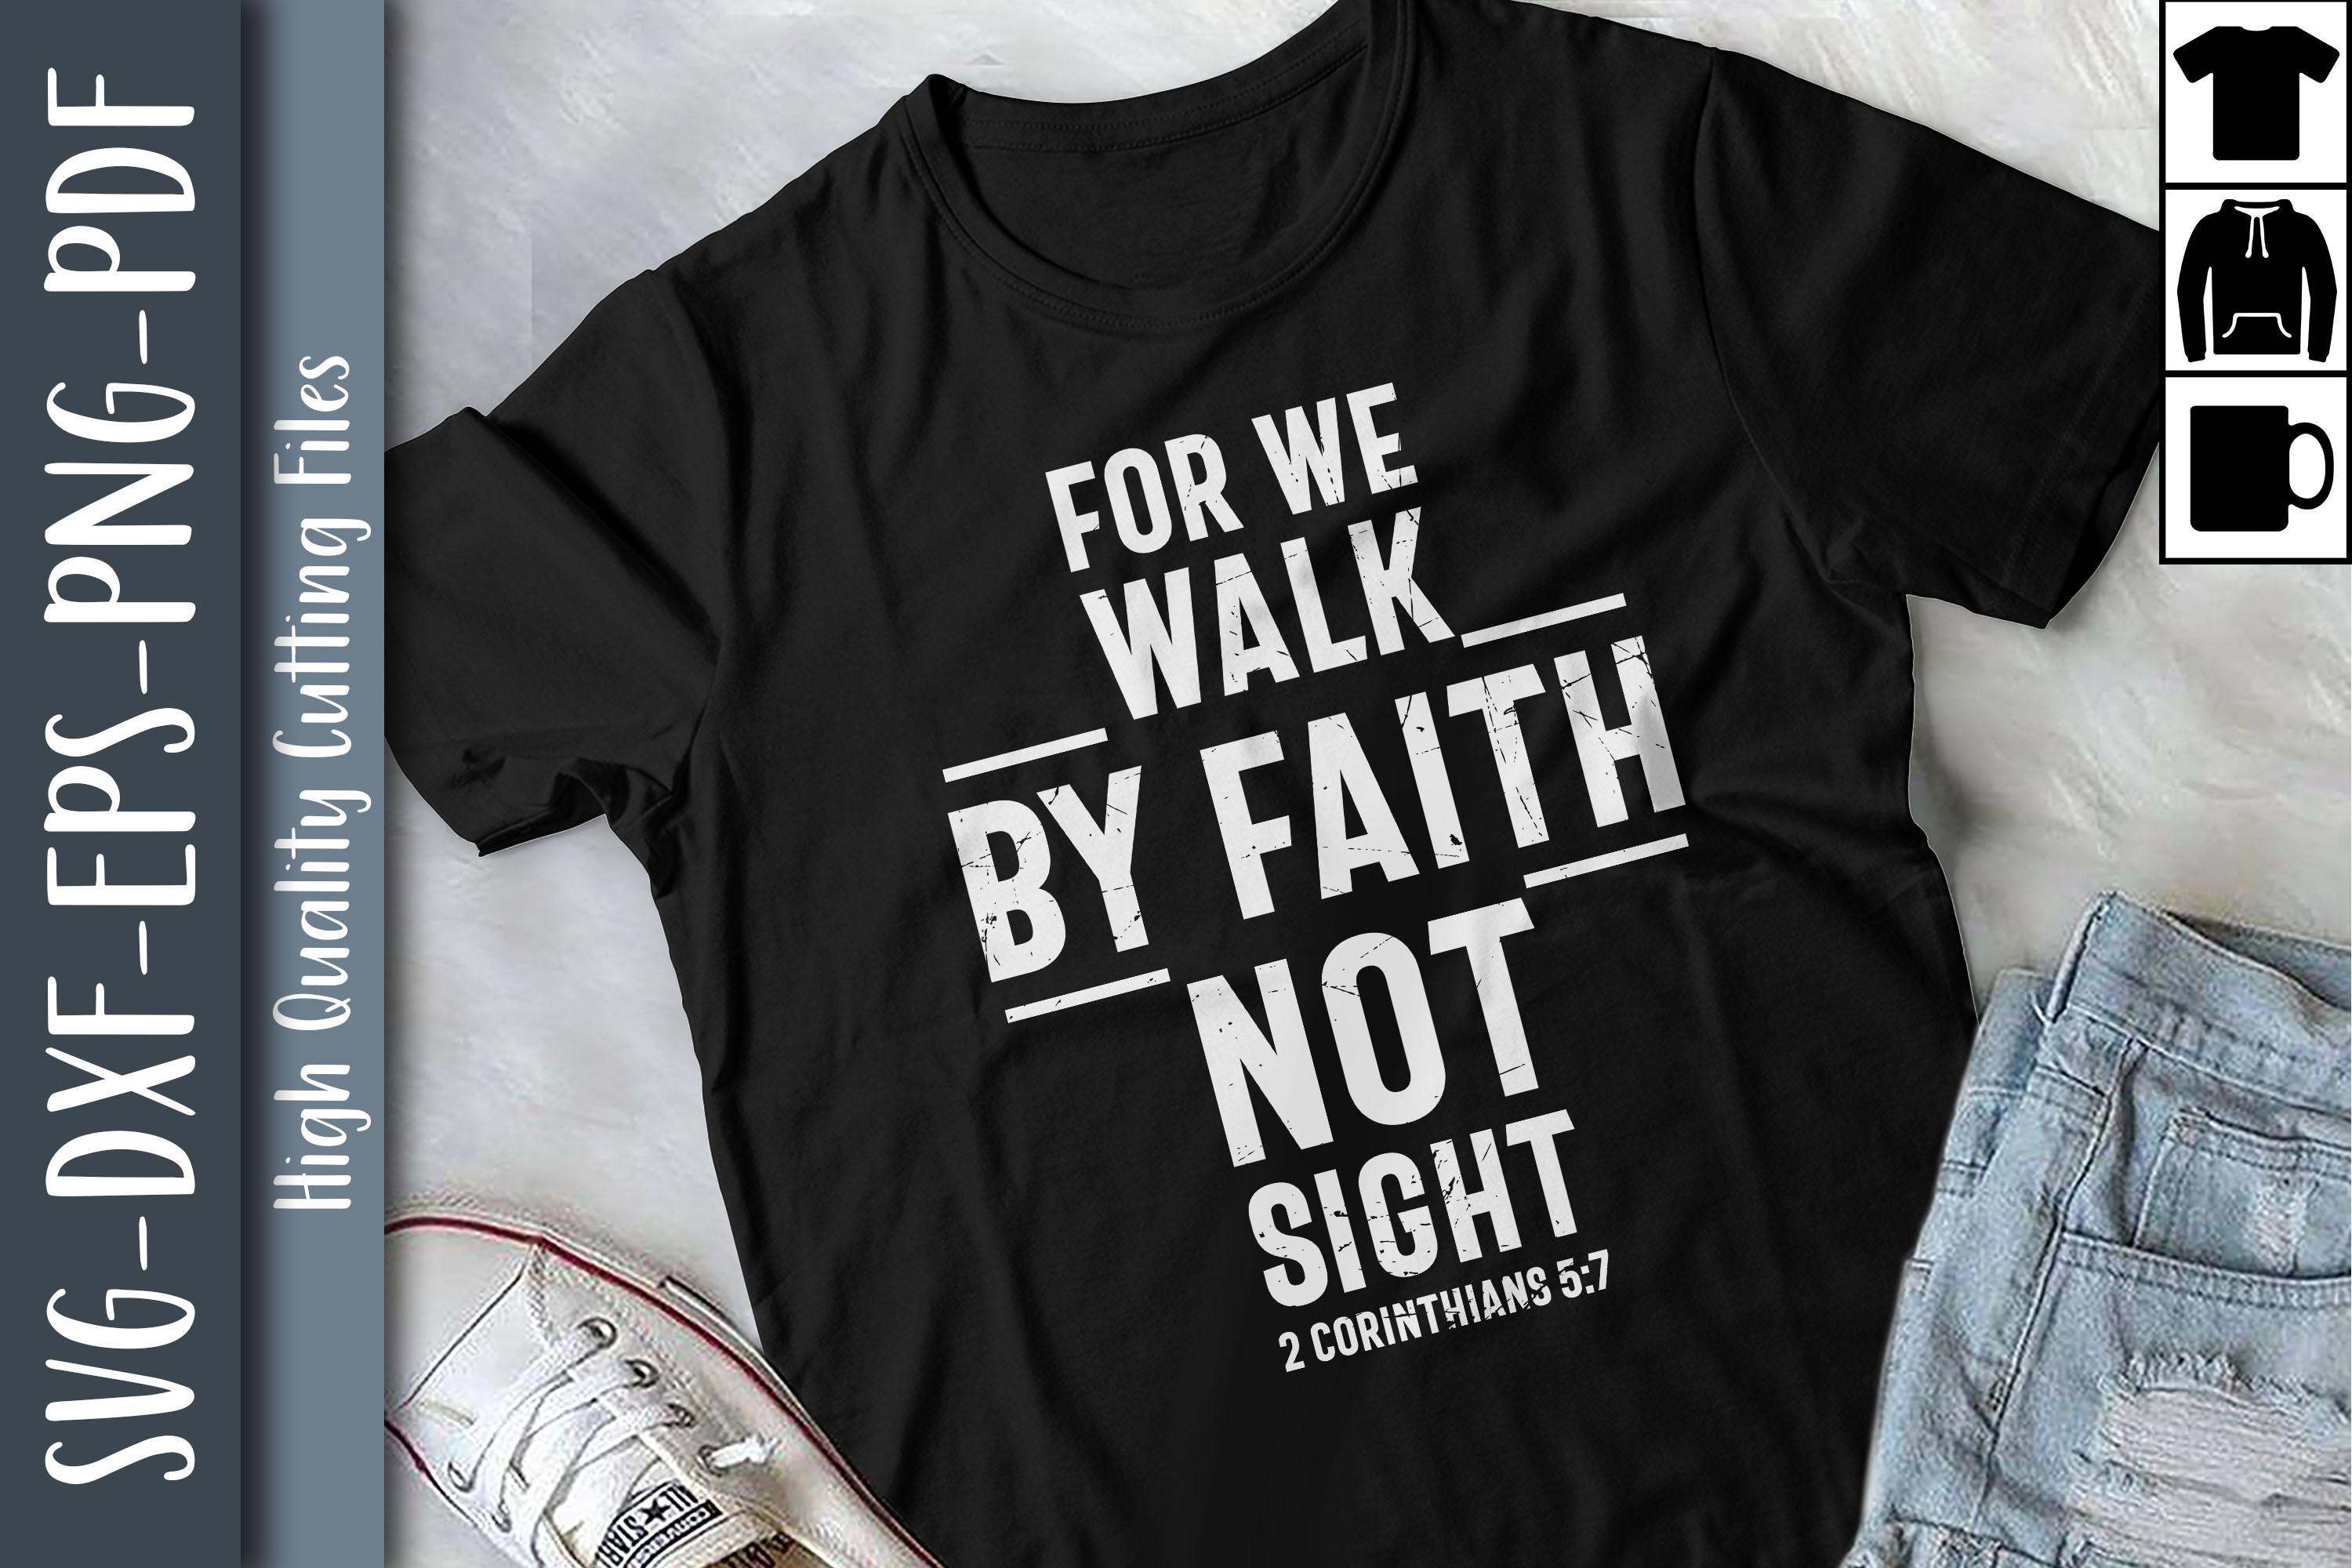 For We Walk by Faith Not Sight